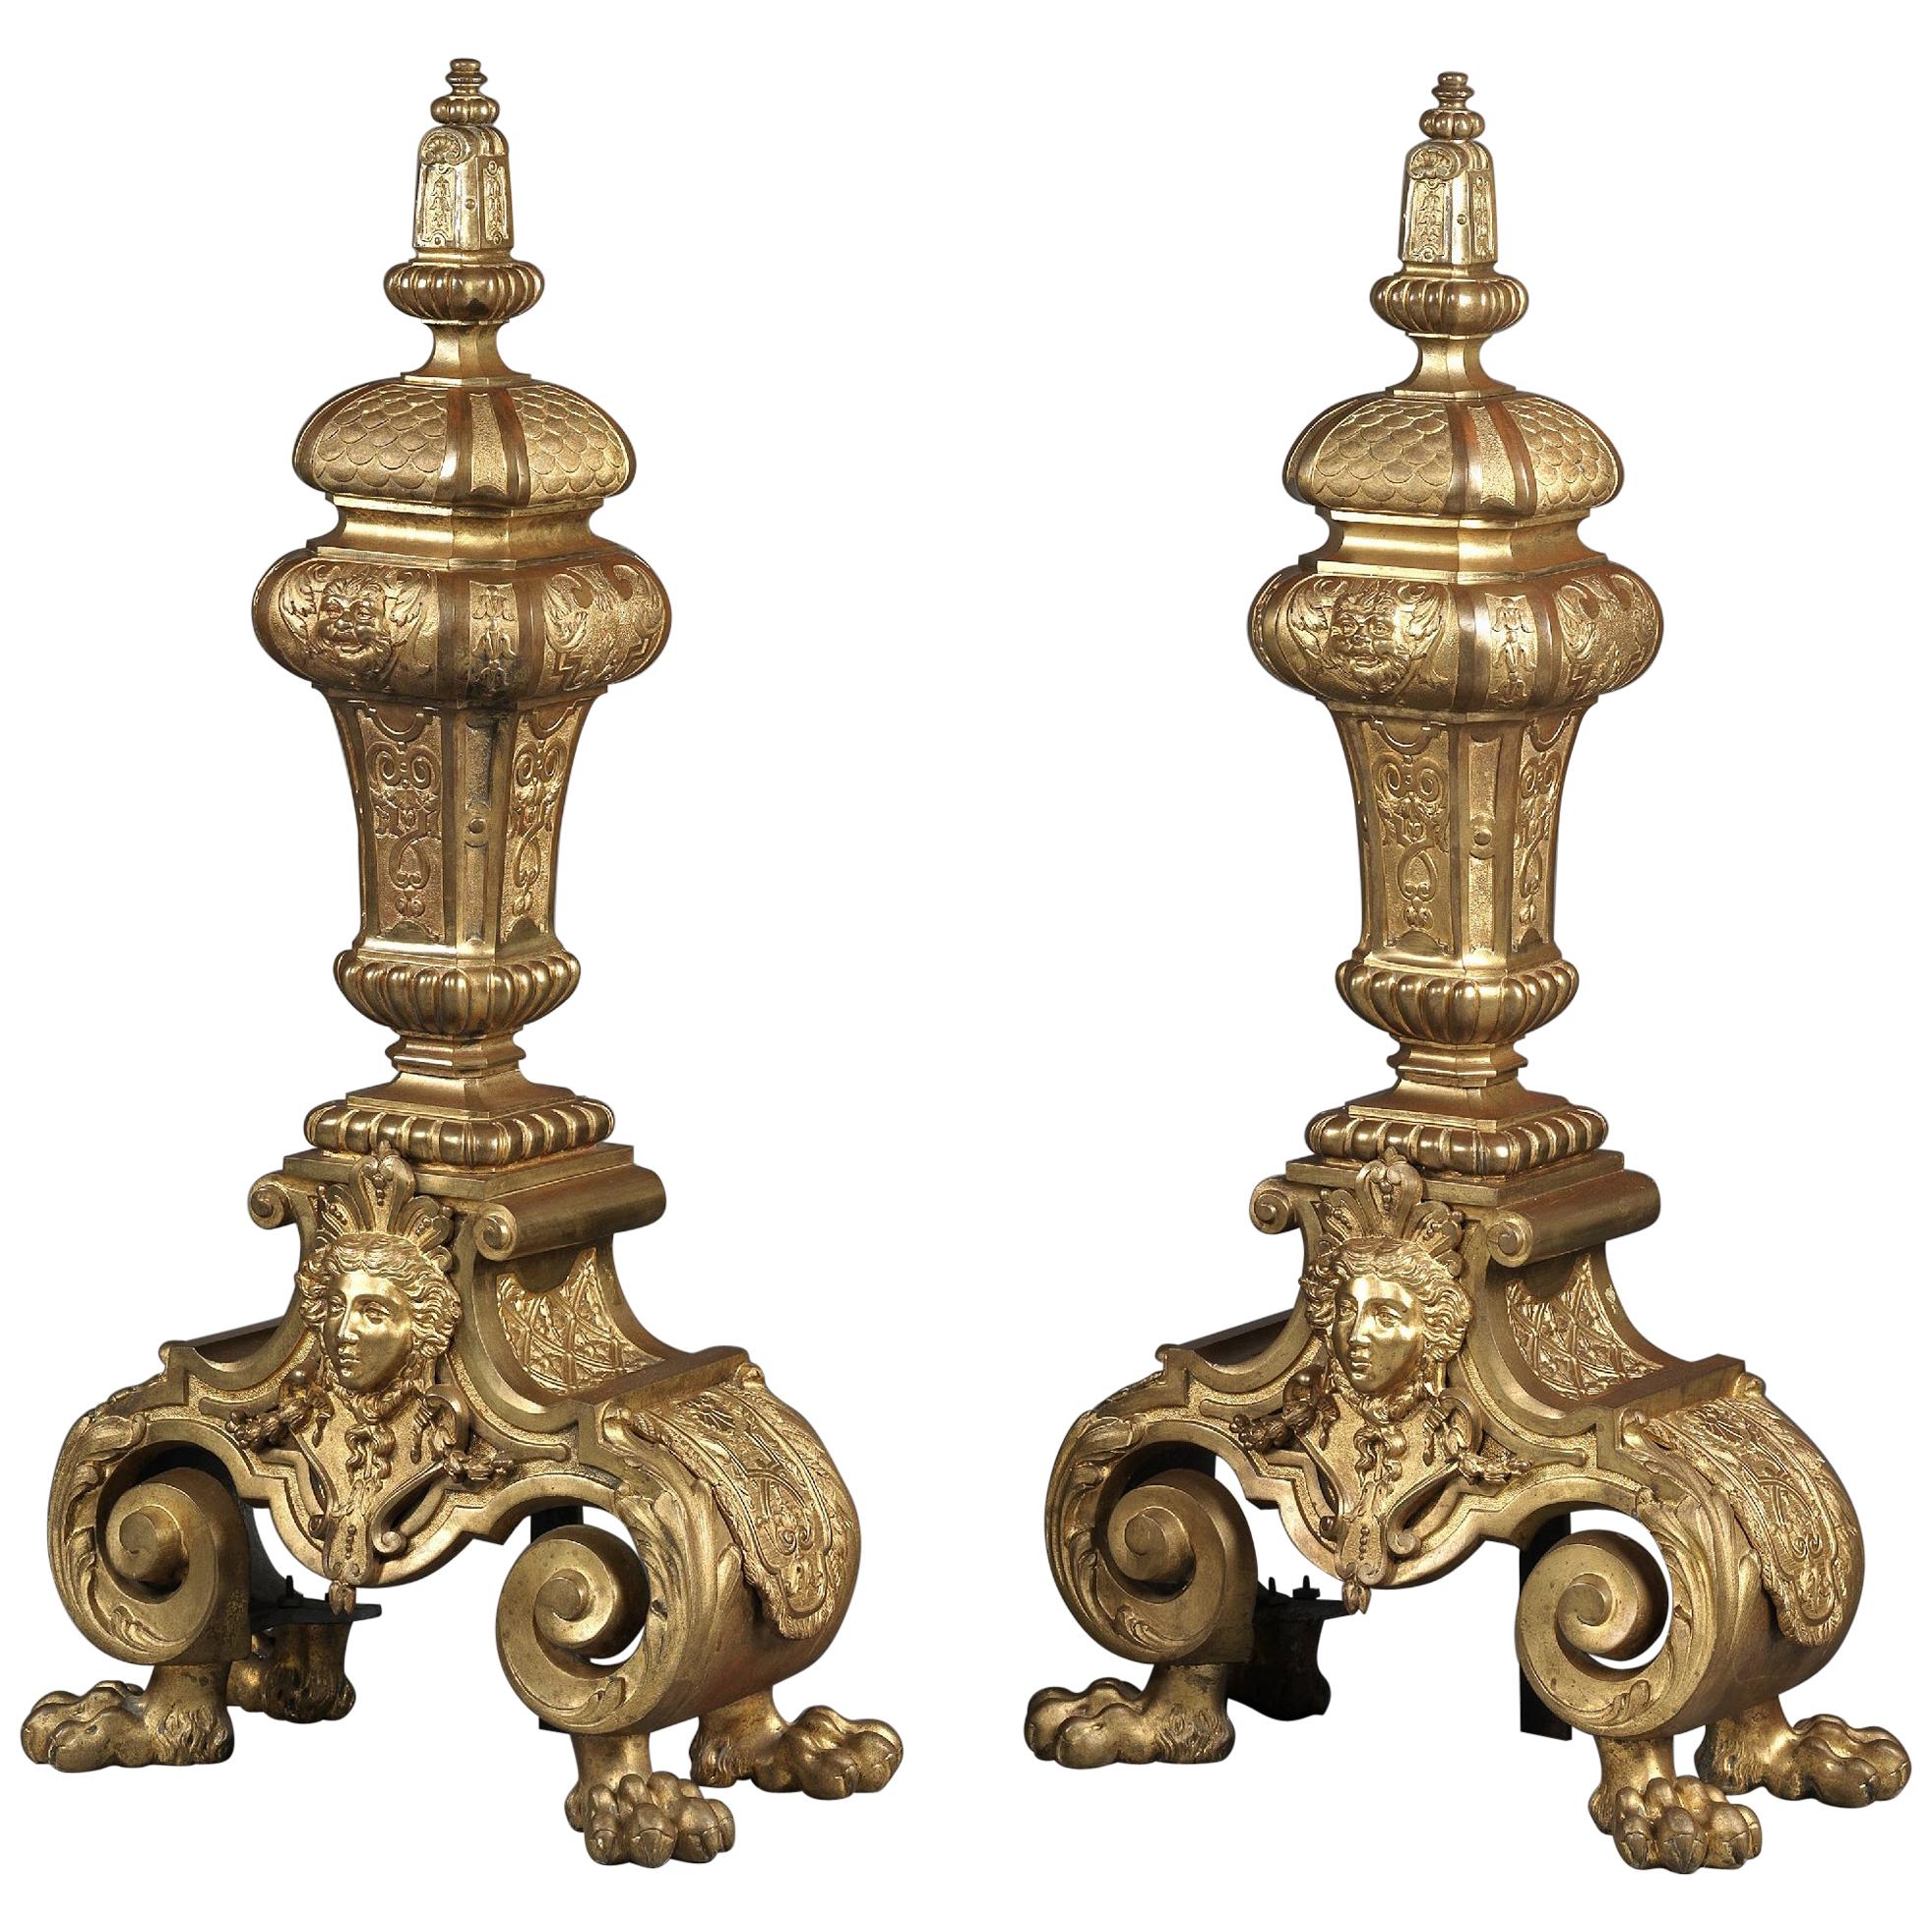 Pair of Exceptionally Large Regence Style Gilt-Bronze Chenets, circa 1860